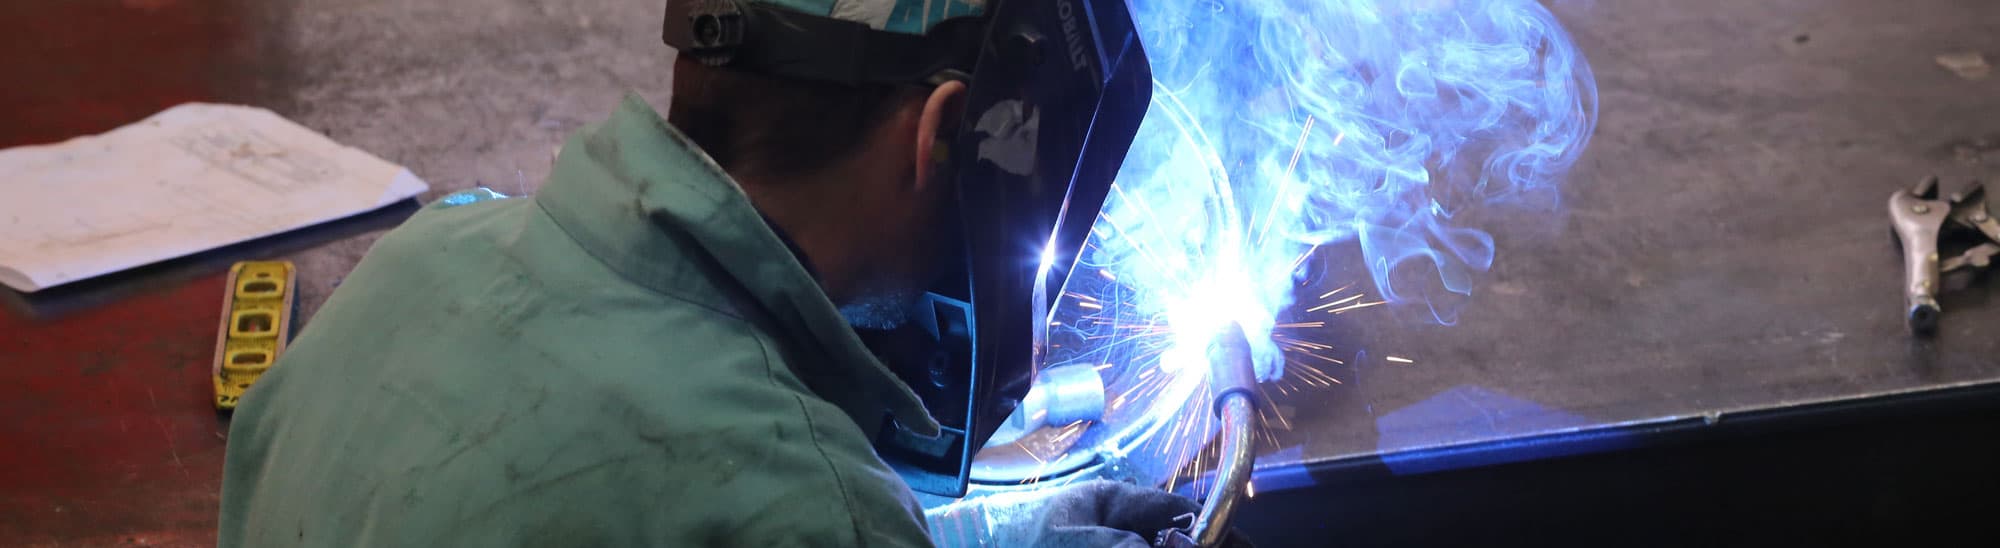 At this weld fume collection company, we weld our equipment together instead of using bolts.